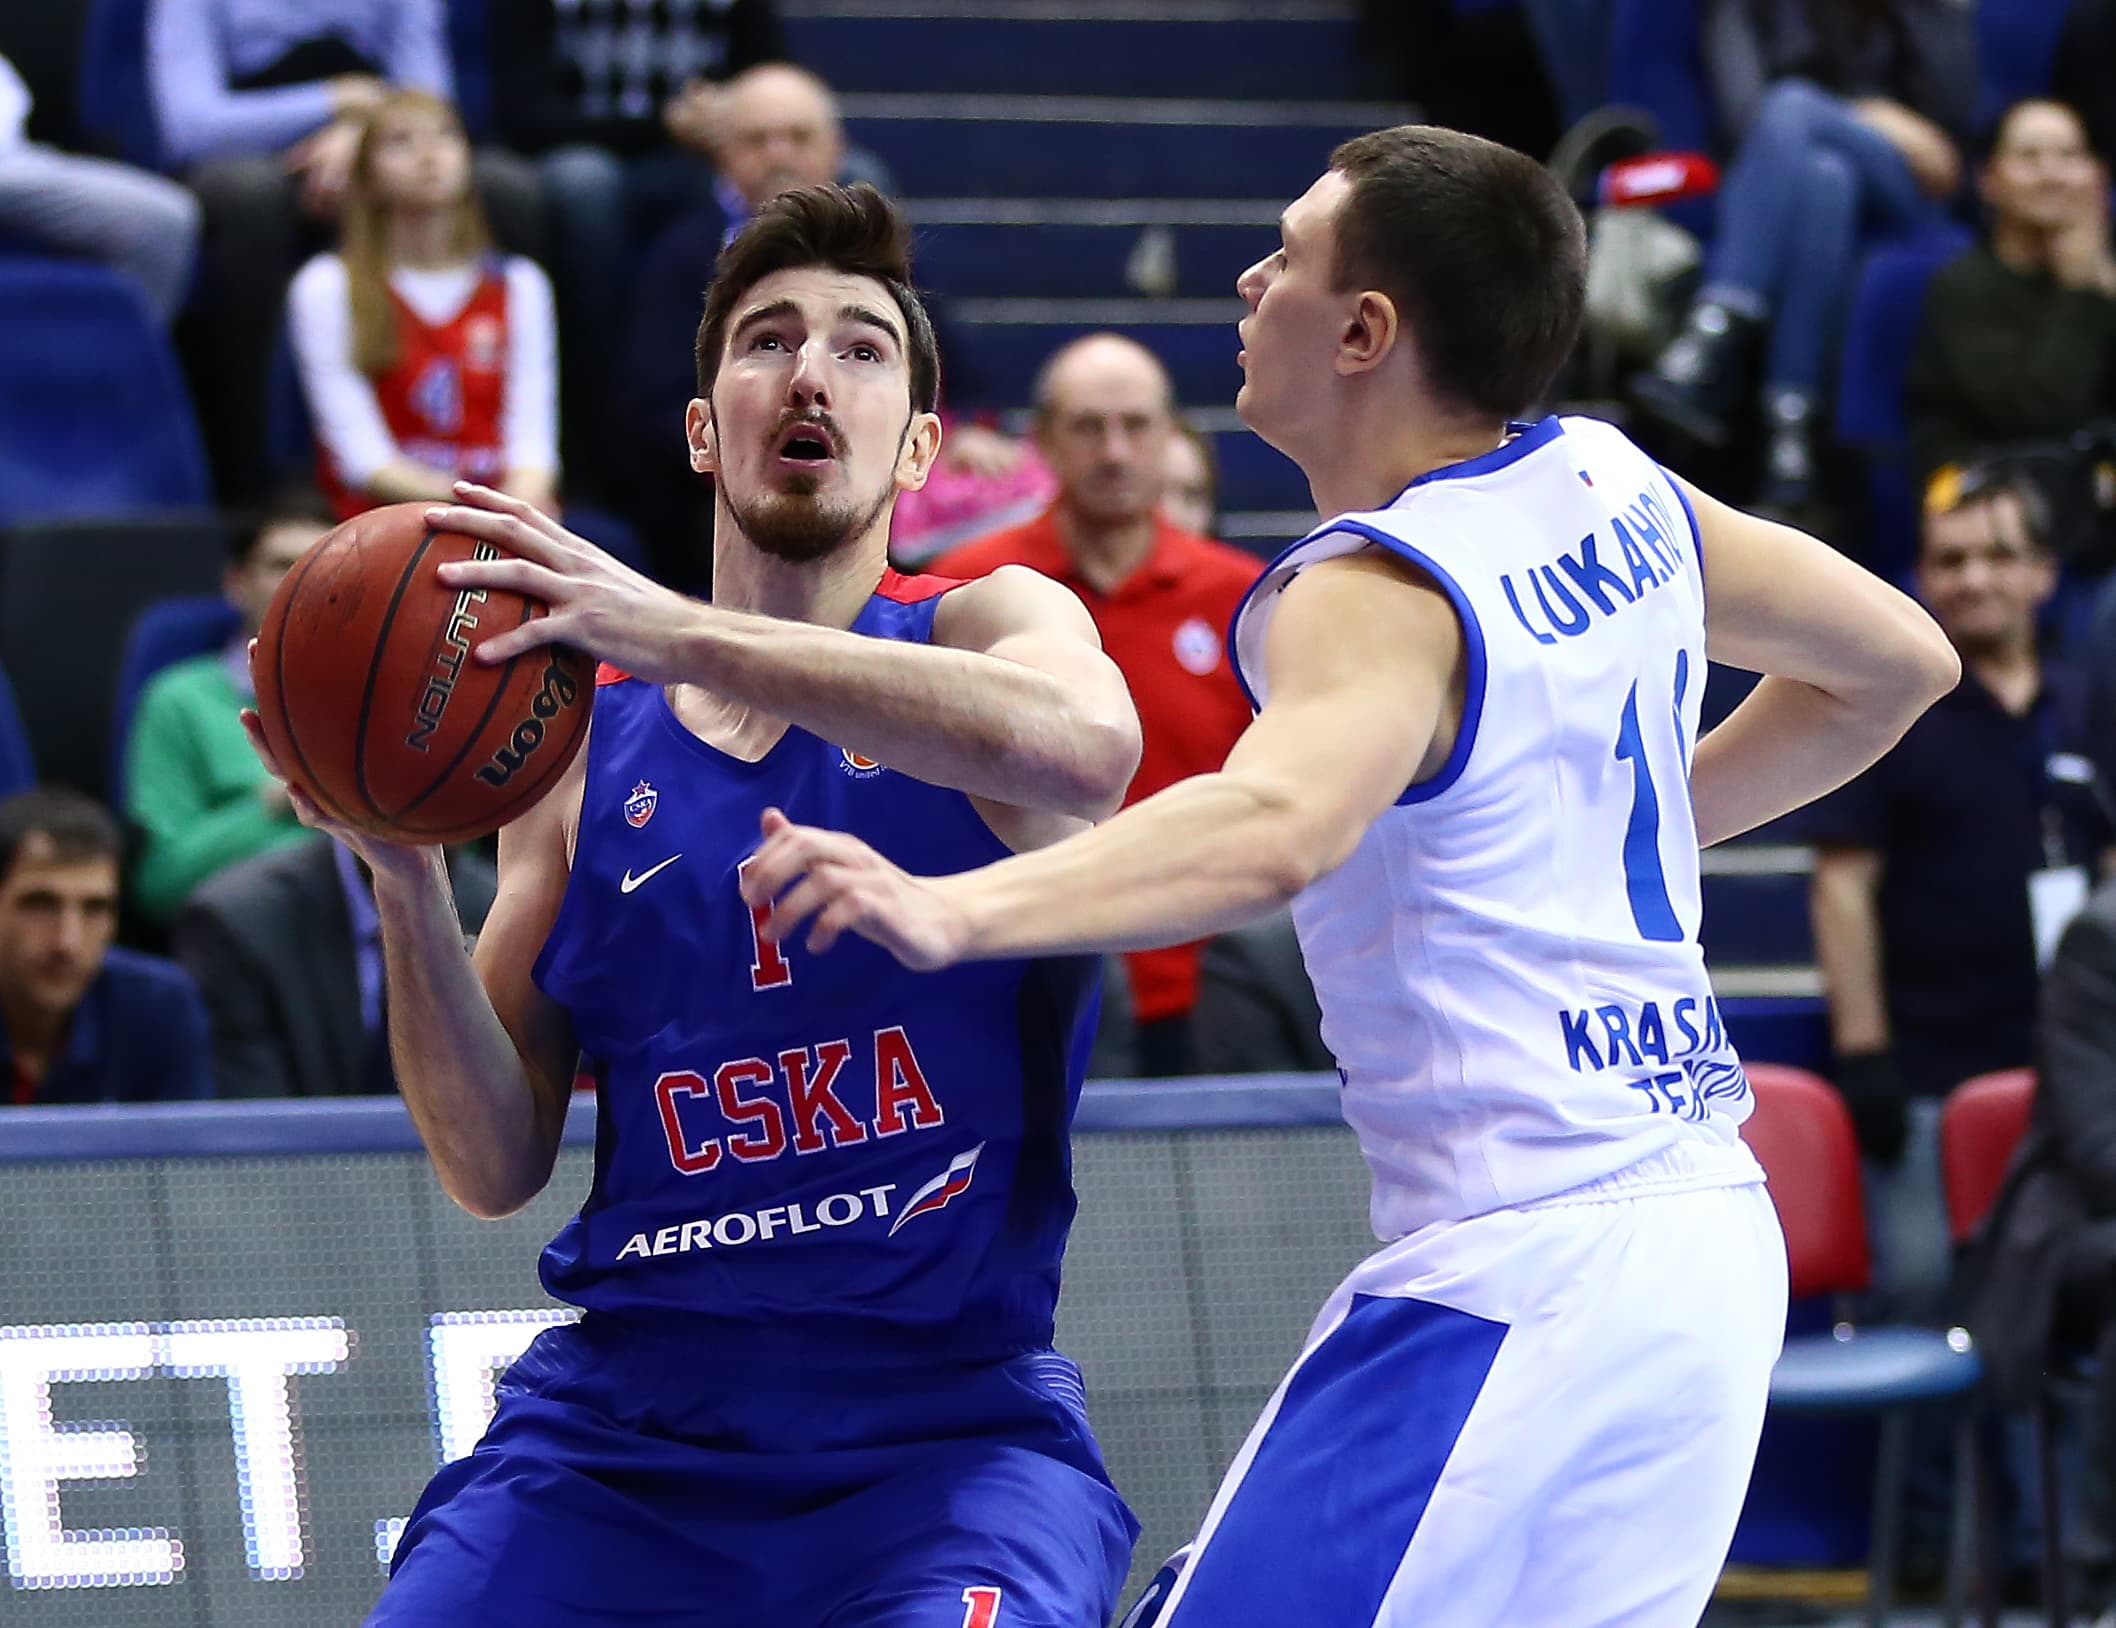 CSKA Quiets Enisey Offense In Moscow